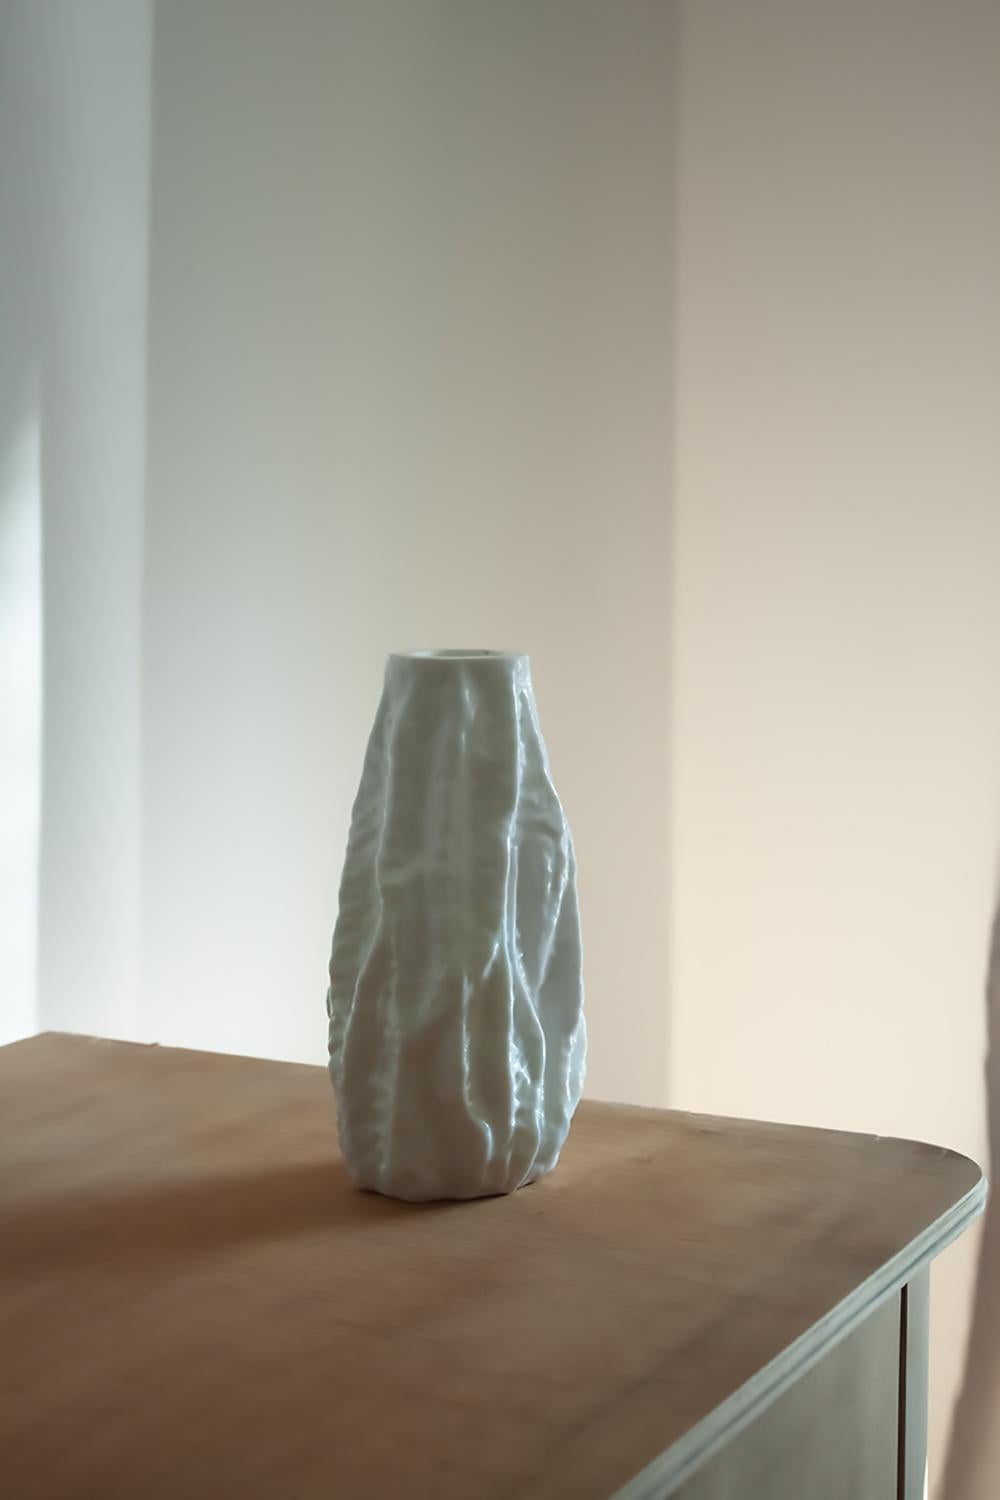 This milk glass vase is in a Brutalist design and was made in Germany around 1970. Its surface is reminiscent of ice or bark, giving this vase a highly textured and interesting surface. This vase, while having a rather tough-looking design, still